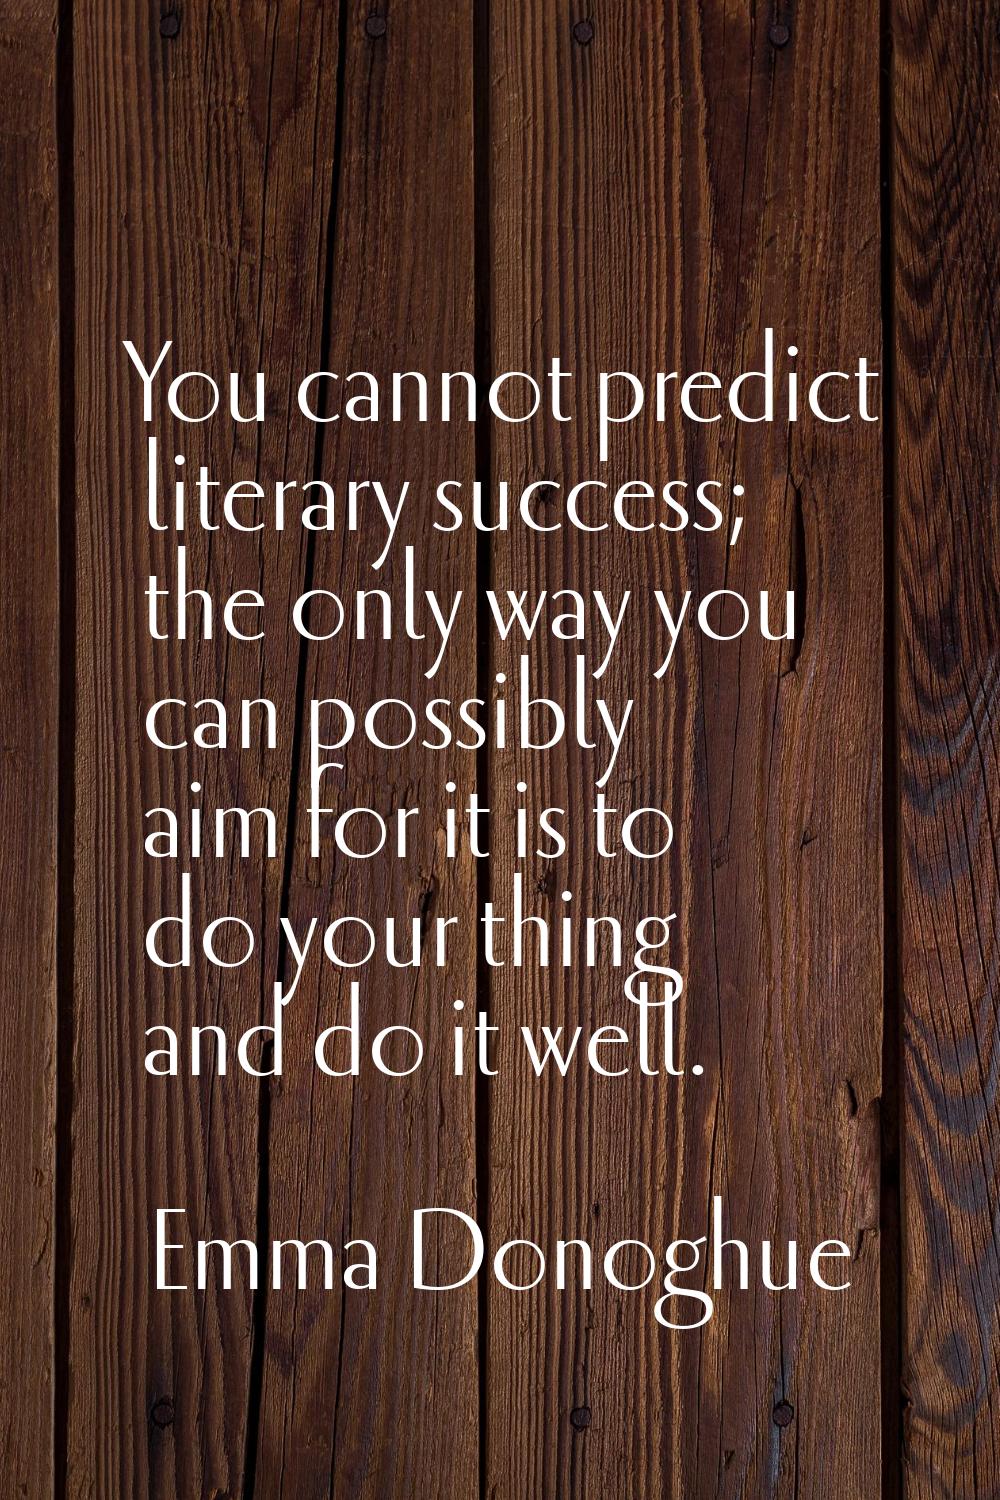 You cannot predict literary success; the only way you can possibly aim for it is to do your thing a